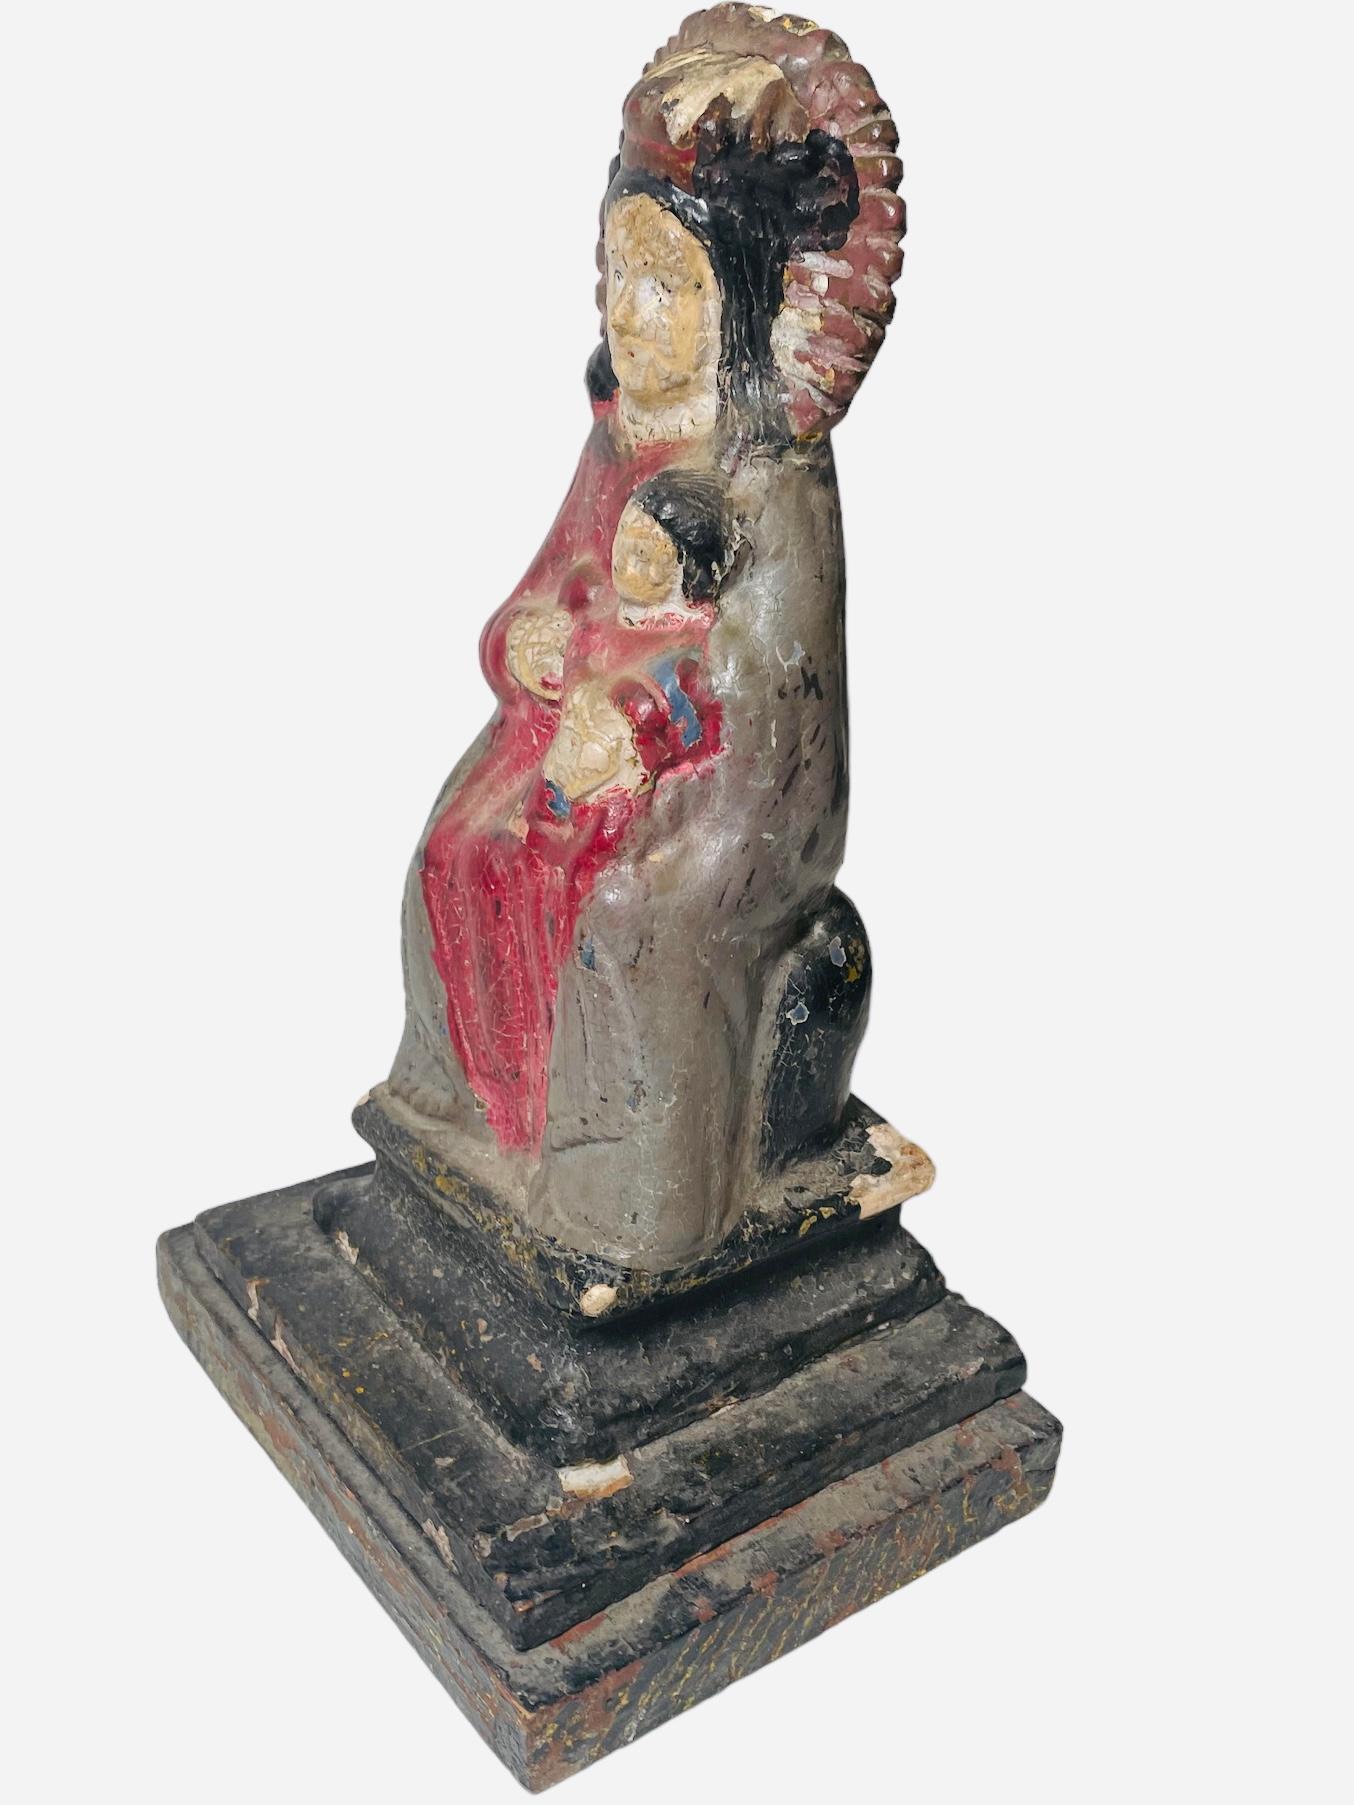 A renowned tradition in Latin America and Puerto Rico is the making of Santos de Palos by master carvers since the 19th century. This is an early 20th century wood plaster carving sculpture of Our Lady of Monserrat and baby Jesus. It was hand carved